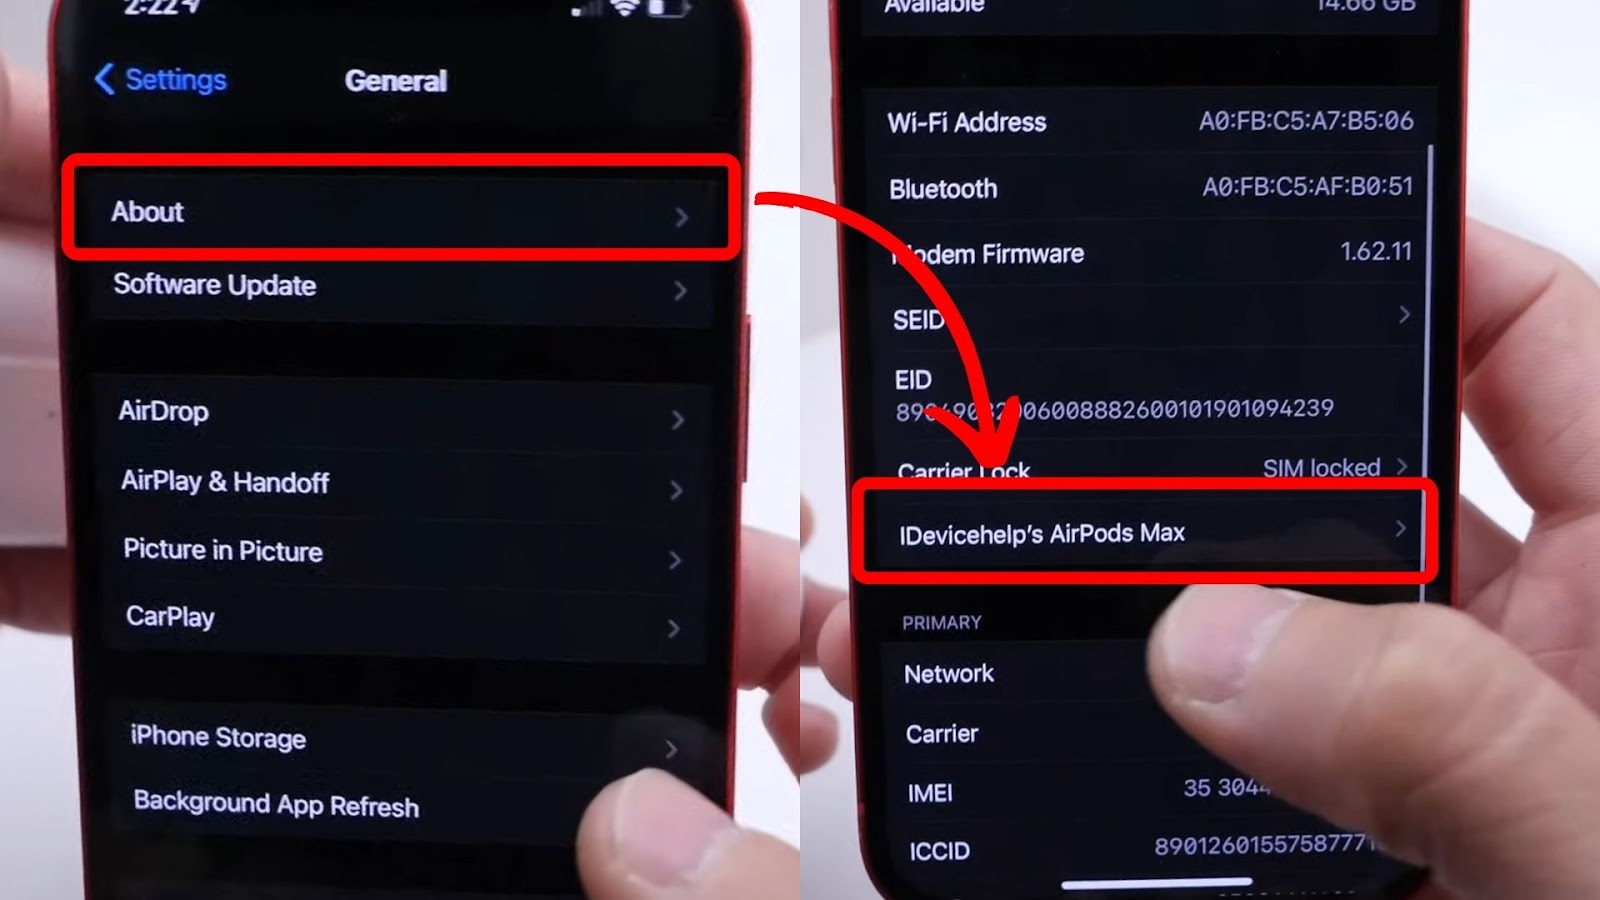 AirPods Name Displayed on Settings Screen